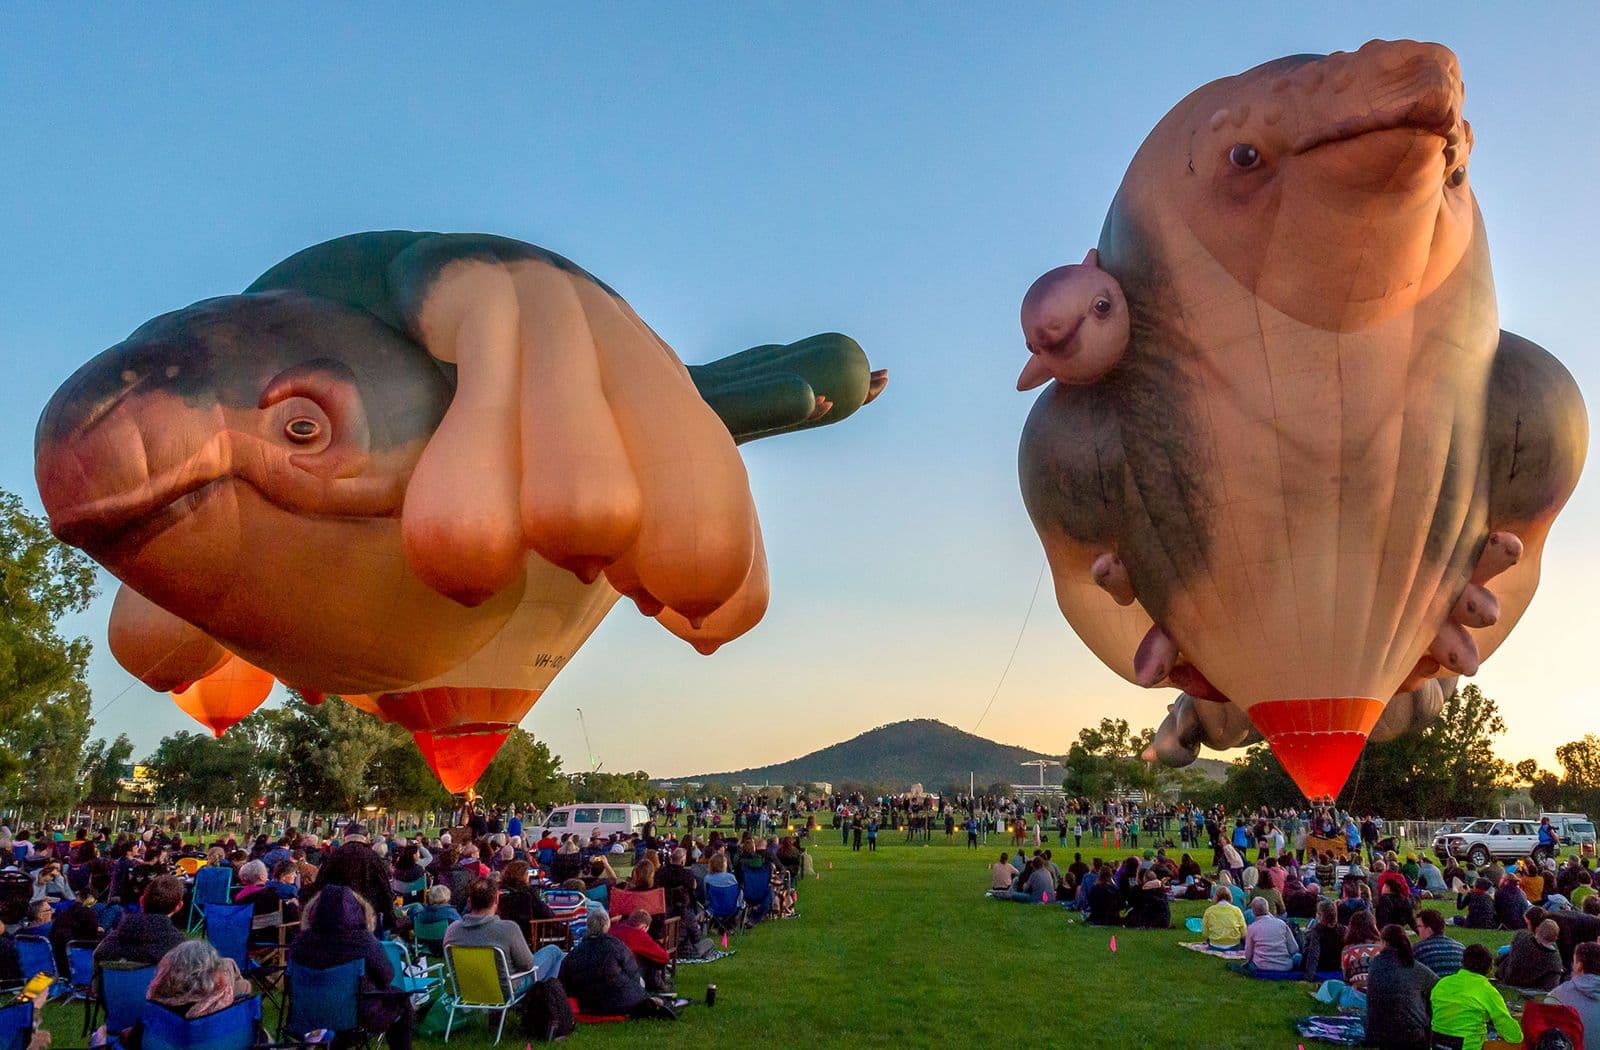 A large crowd watches two large hot-air balloons in the shape of skywhales float above the ground in the early morning